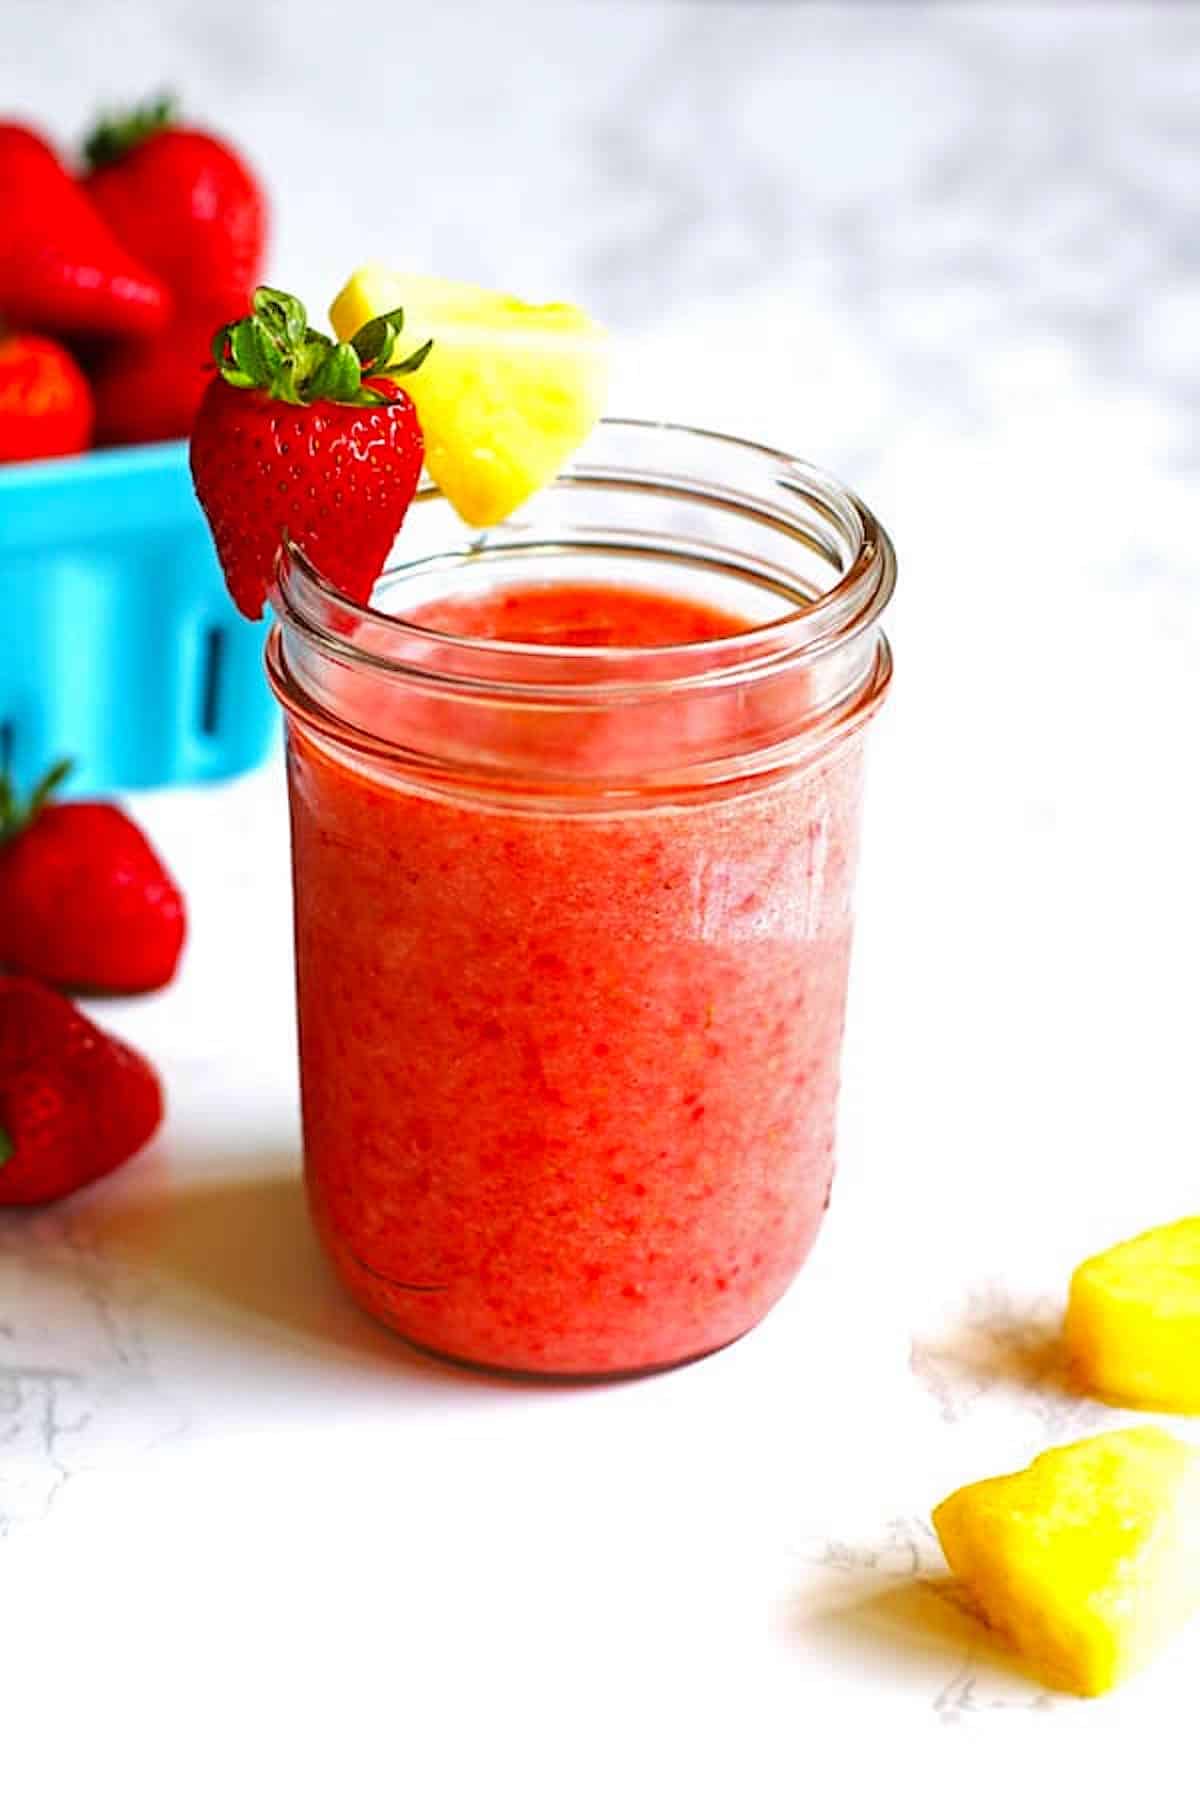 Smoothie in a glass with strawberry and pineapple along the rim of the glass